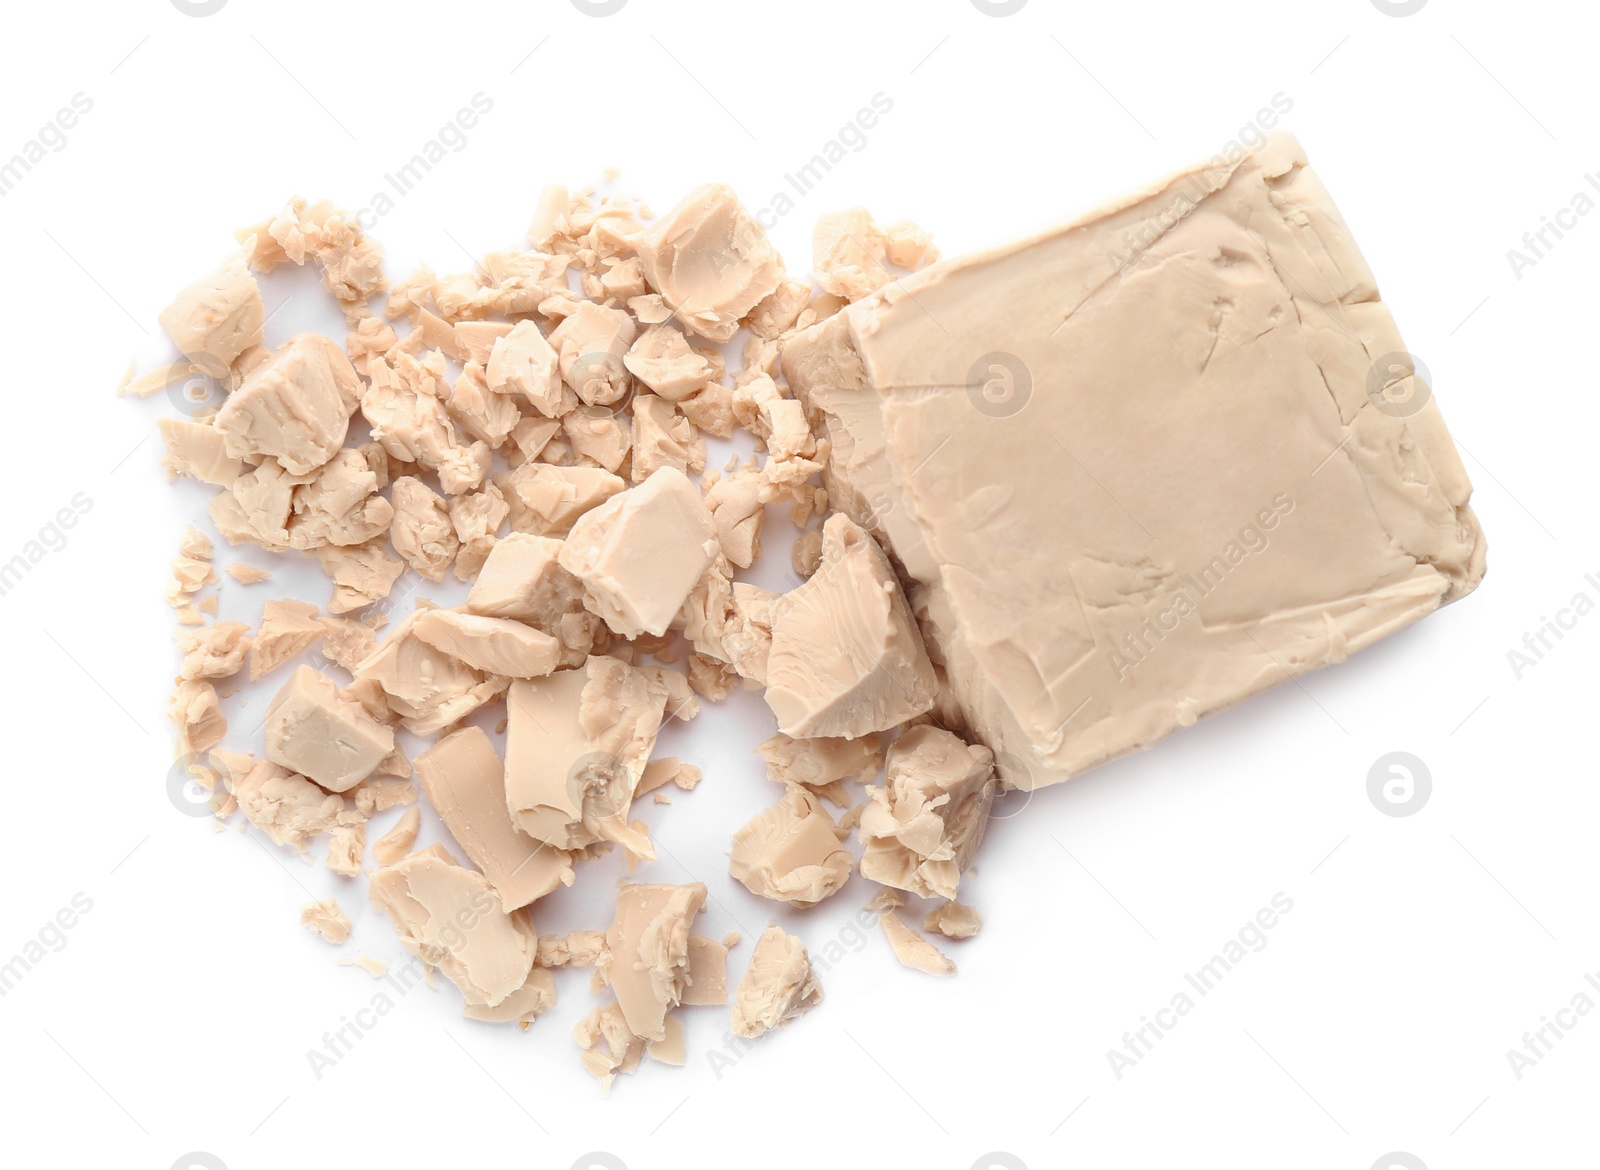 Photo of Crumbled block of compressed yeast on white background, top view